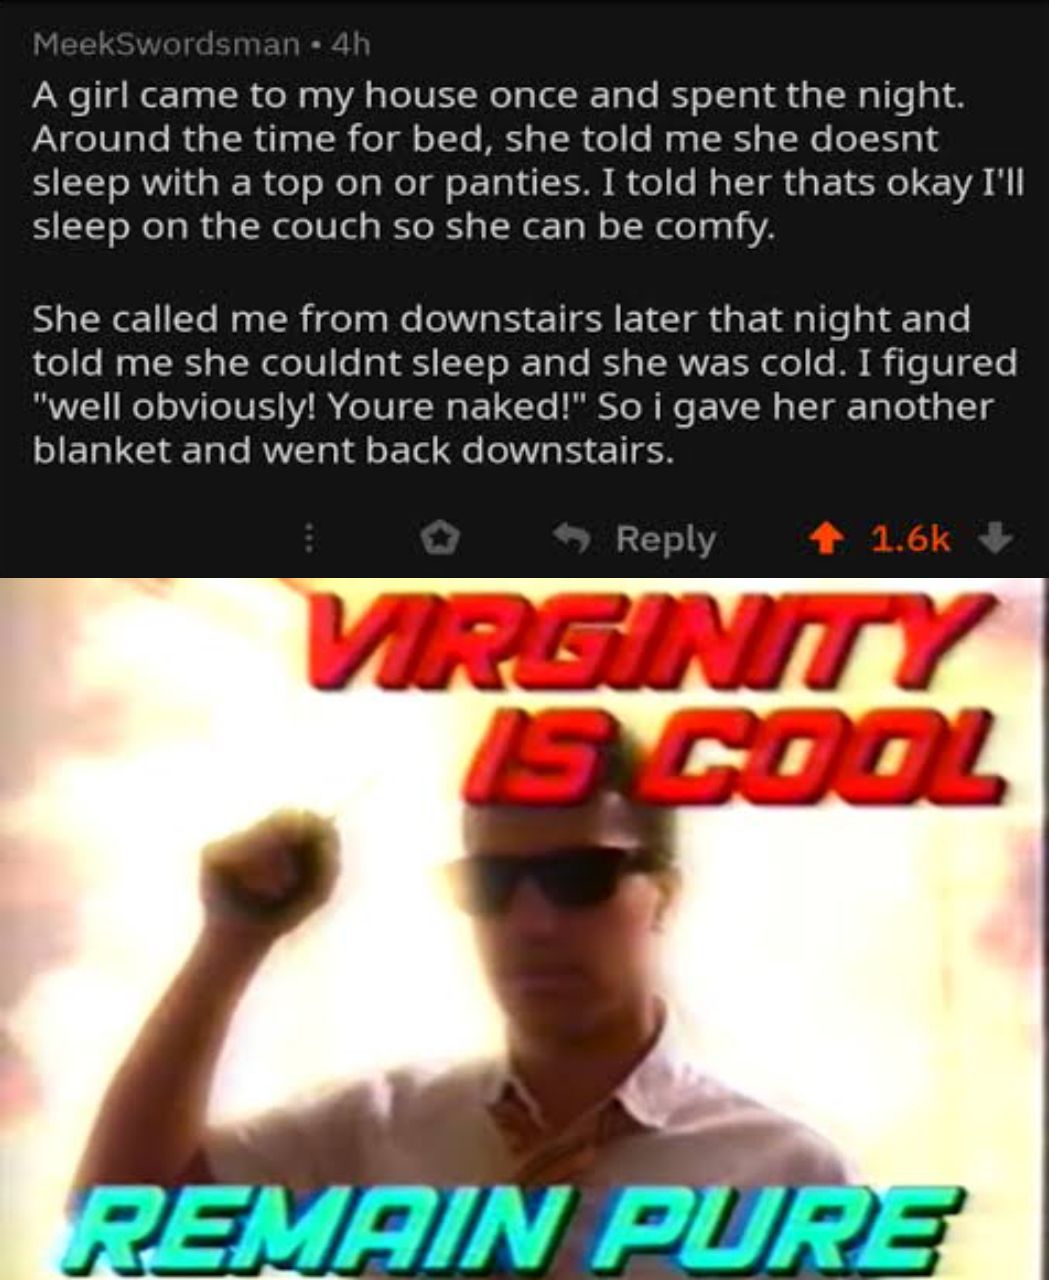 VIRGINITY IS COOL REMAIN PURE